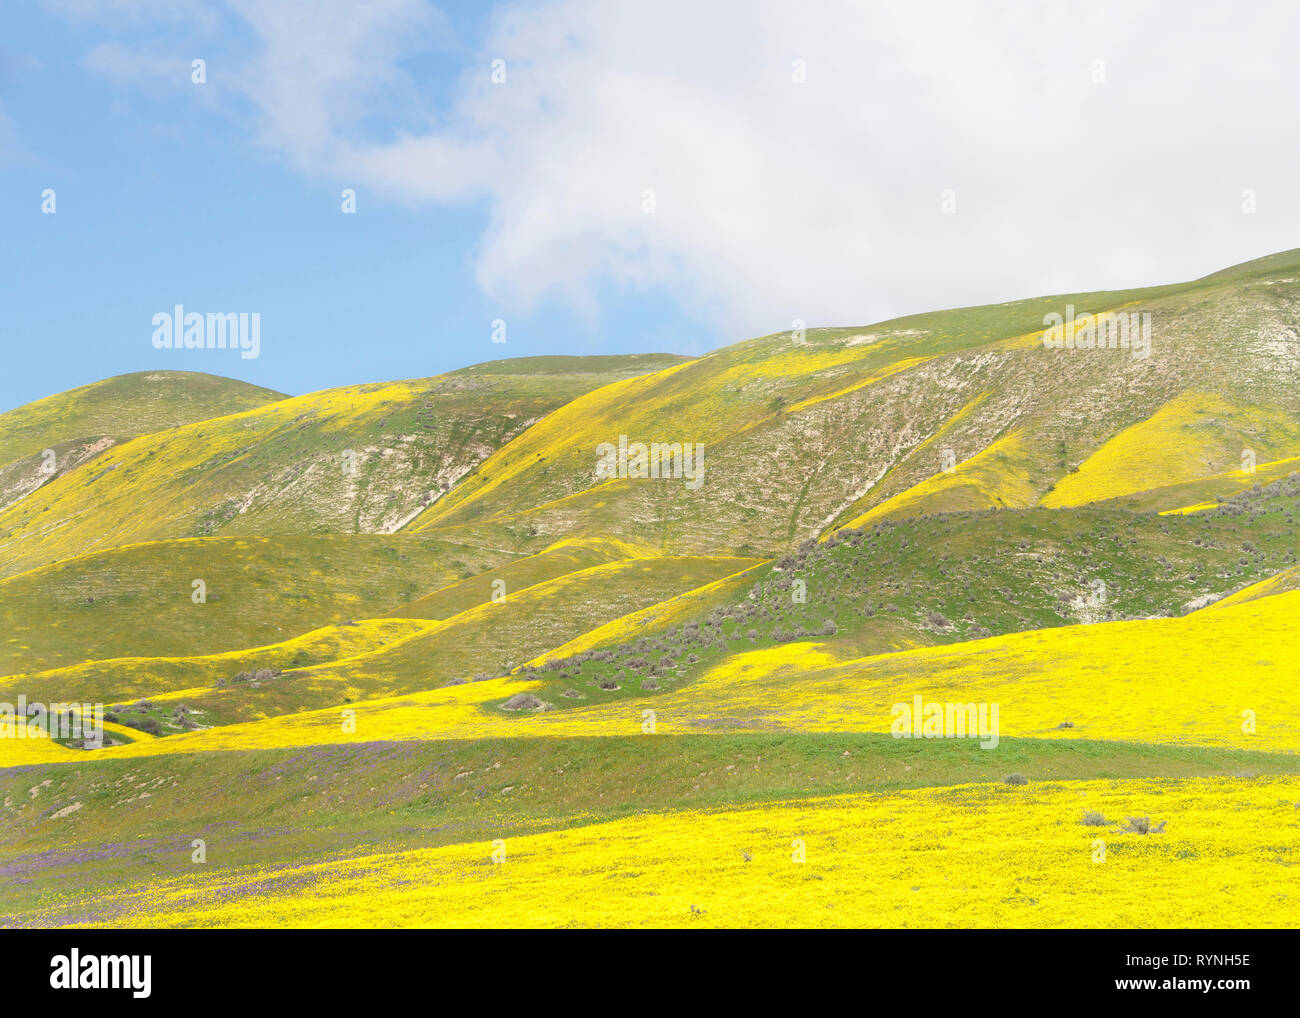 Hills around Santa Margarita, California, blooming vibrant yellow after weeks of heavy rain in the area. Super bloom. Stock Photo